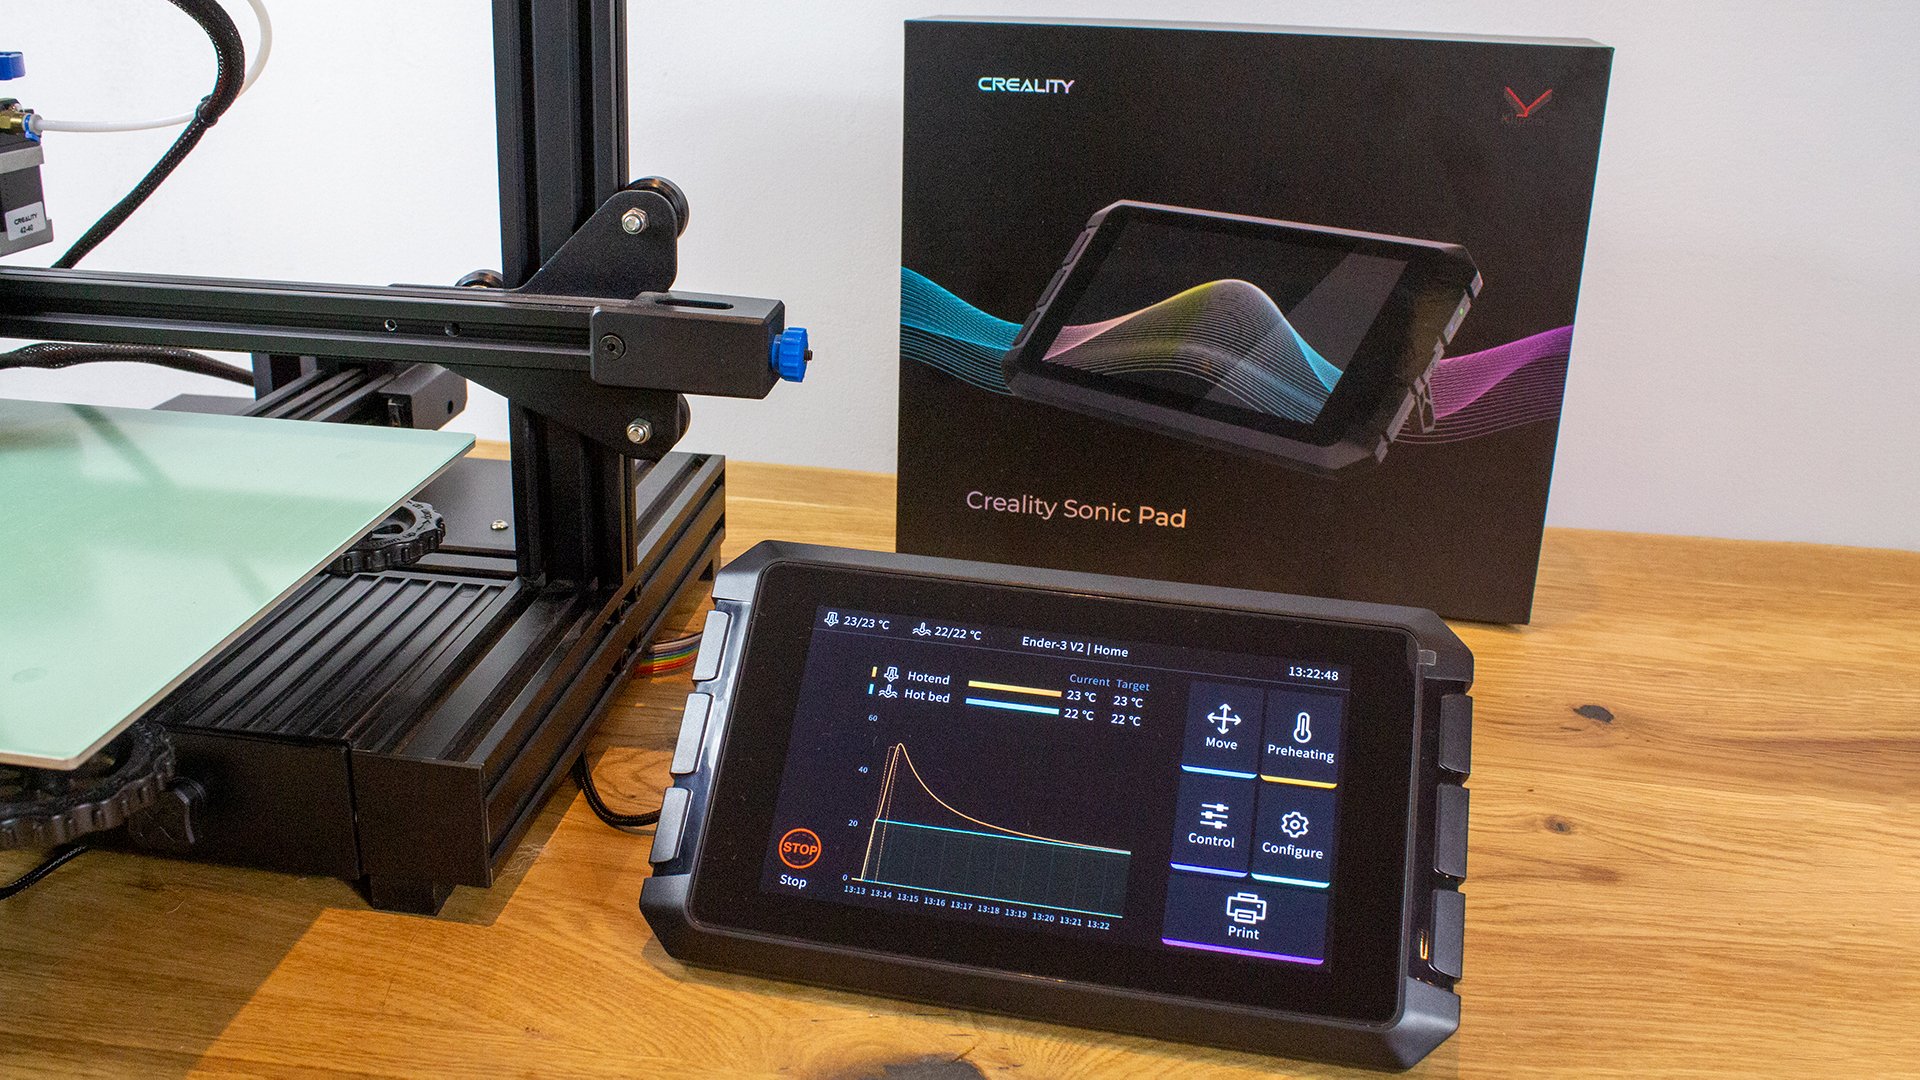 Speed Up 3D Printing with the Creality Sonic Pad